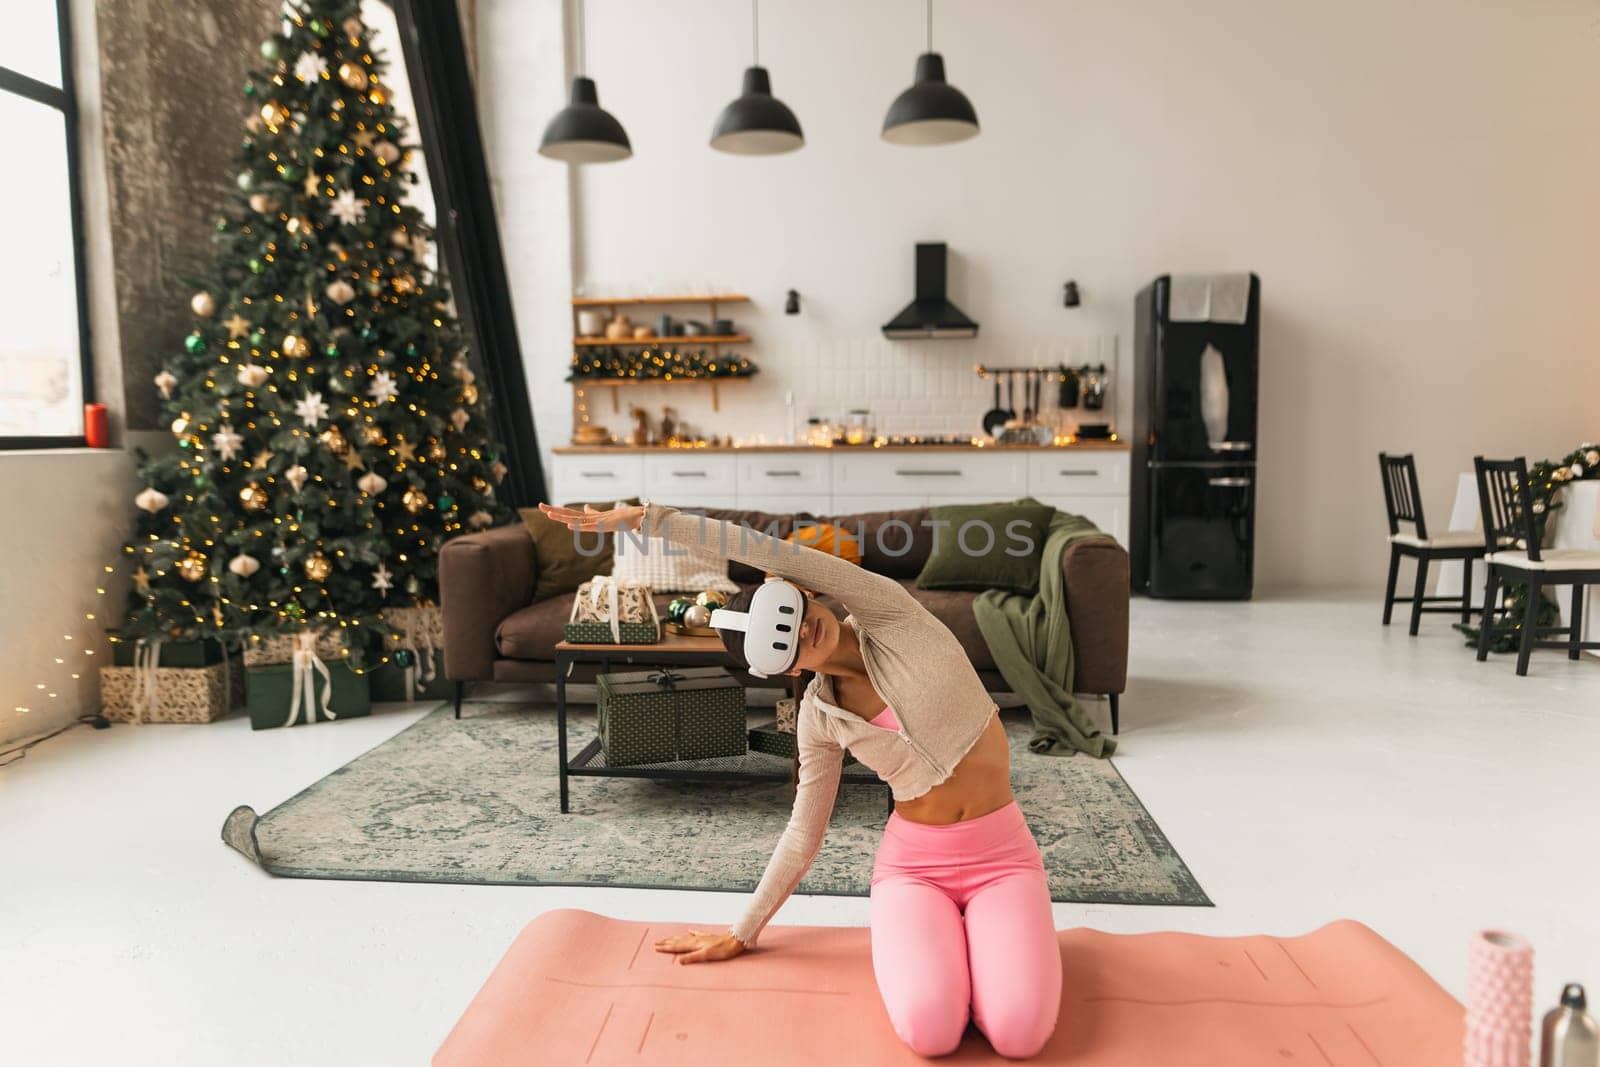 Engrossed in yoga practice, a fitness enthusiast wears virtual reality goggles by a Christmas tree. by teksomolika